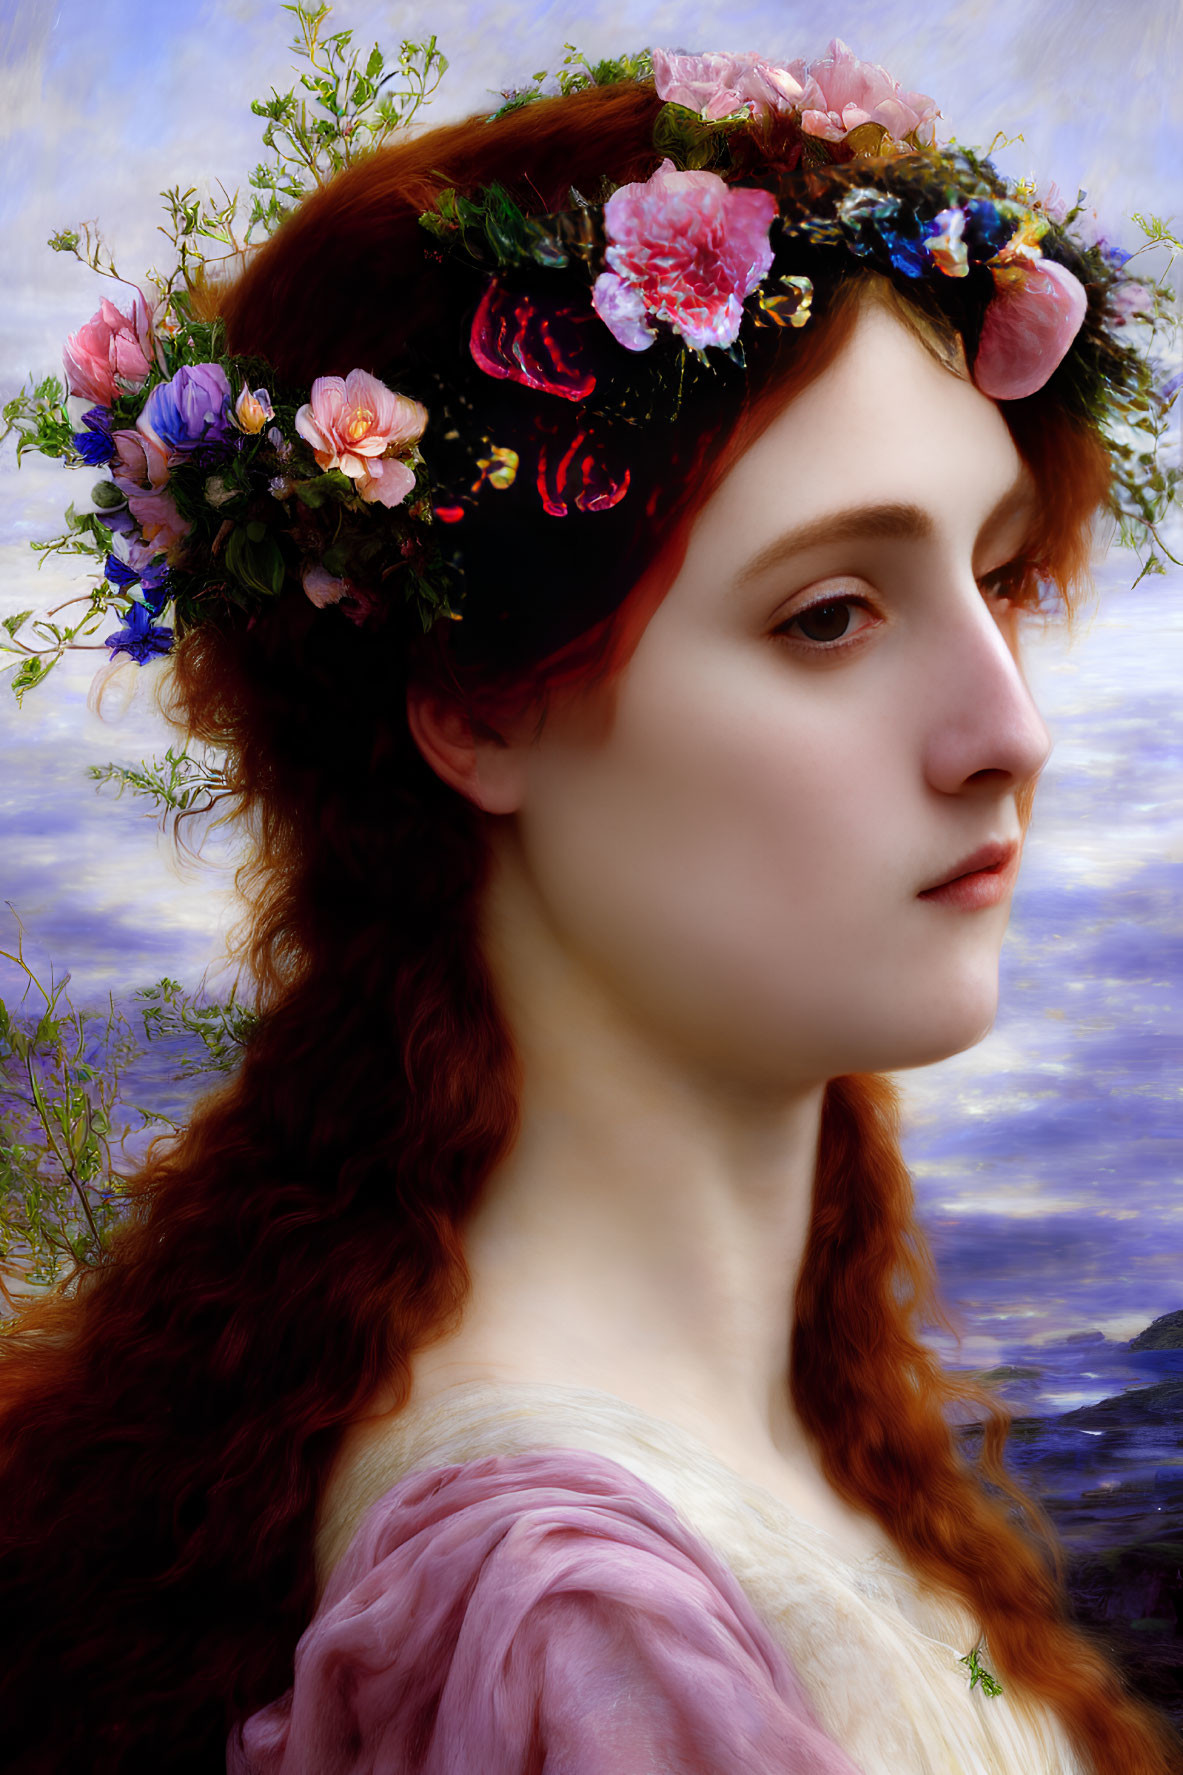 Woman portrait with floral crown and auburn hair in pink dress against cloudy purple sky